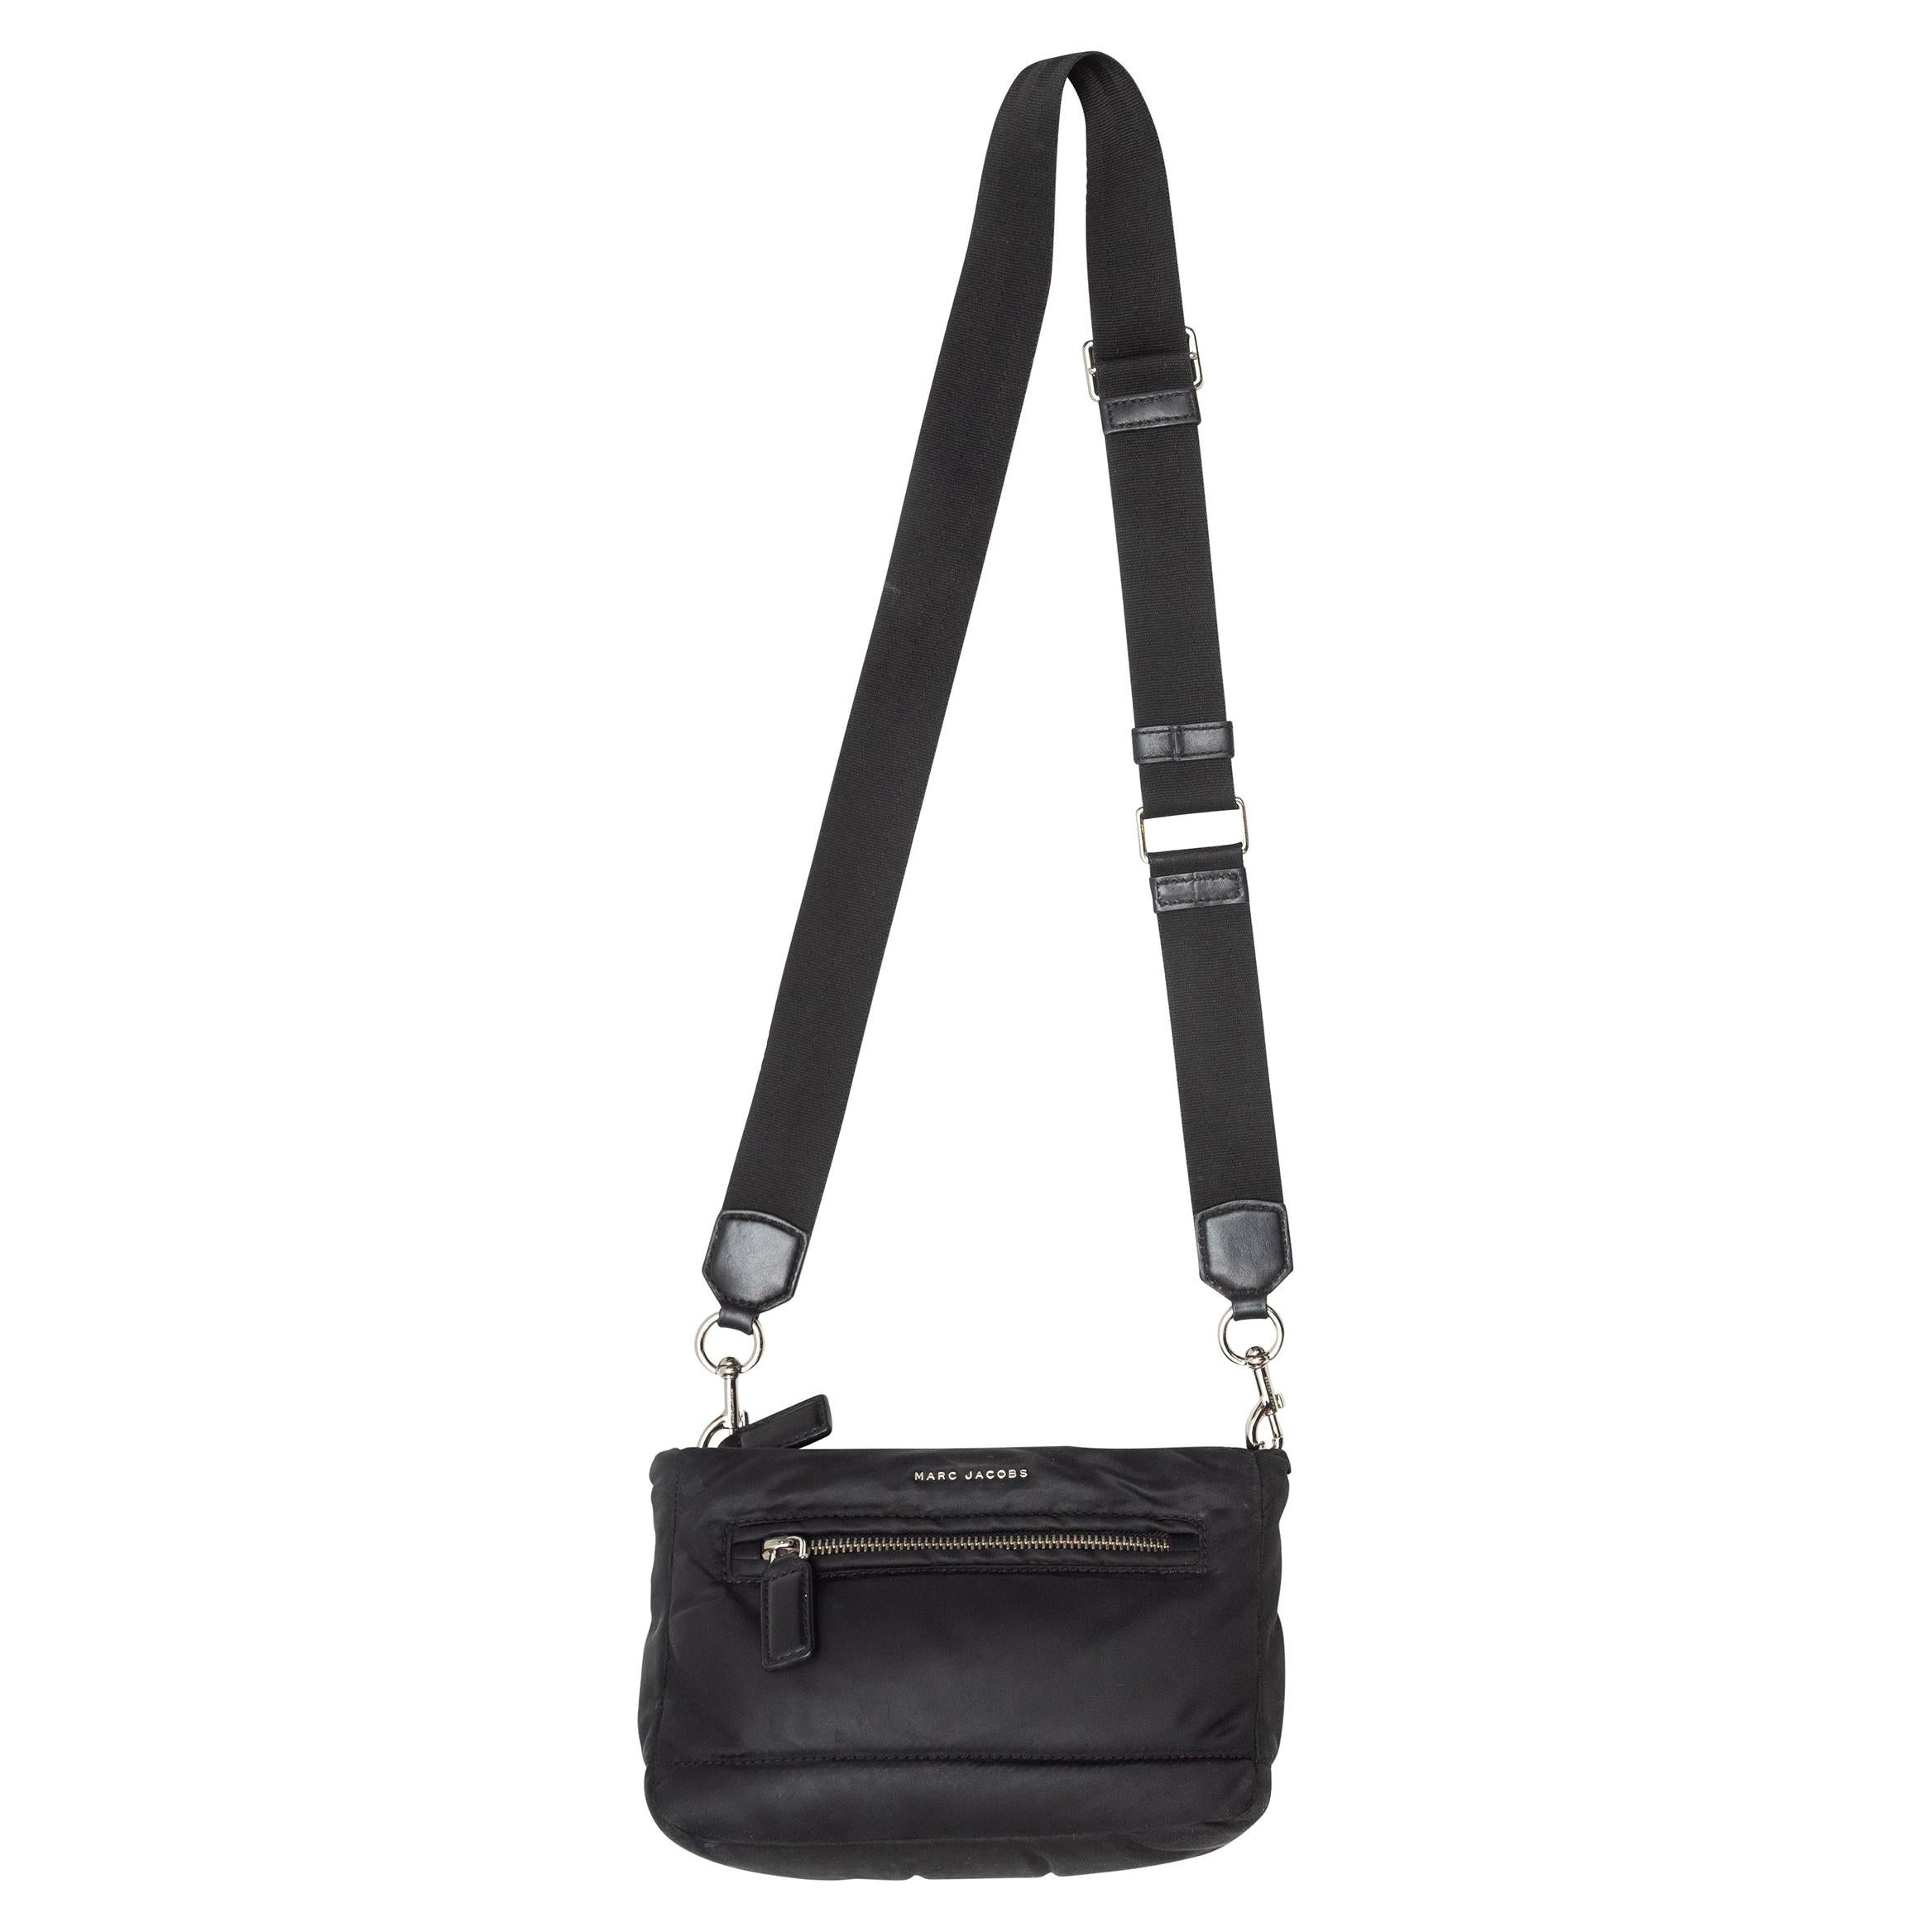 NWT MARC JACOBS Playback Crossbody Bag In Black Saffiano Leather